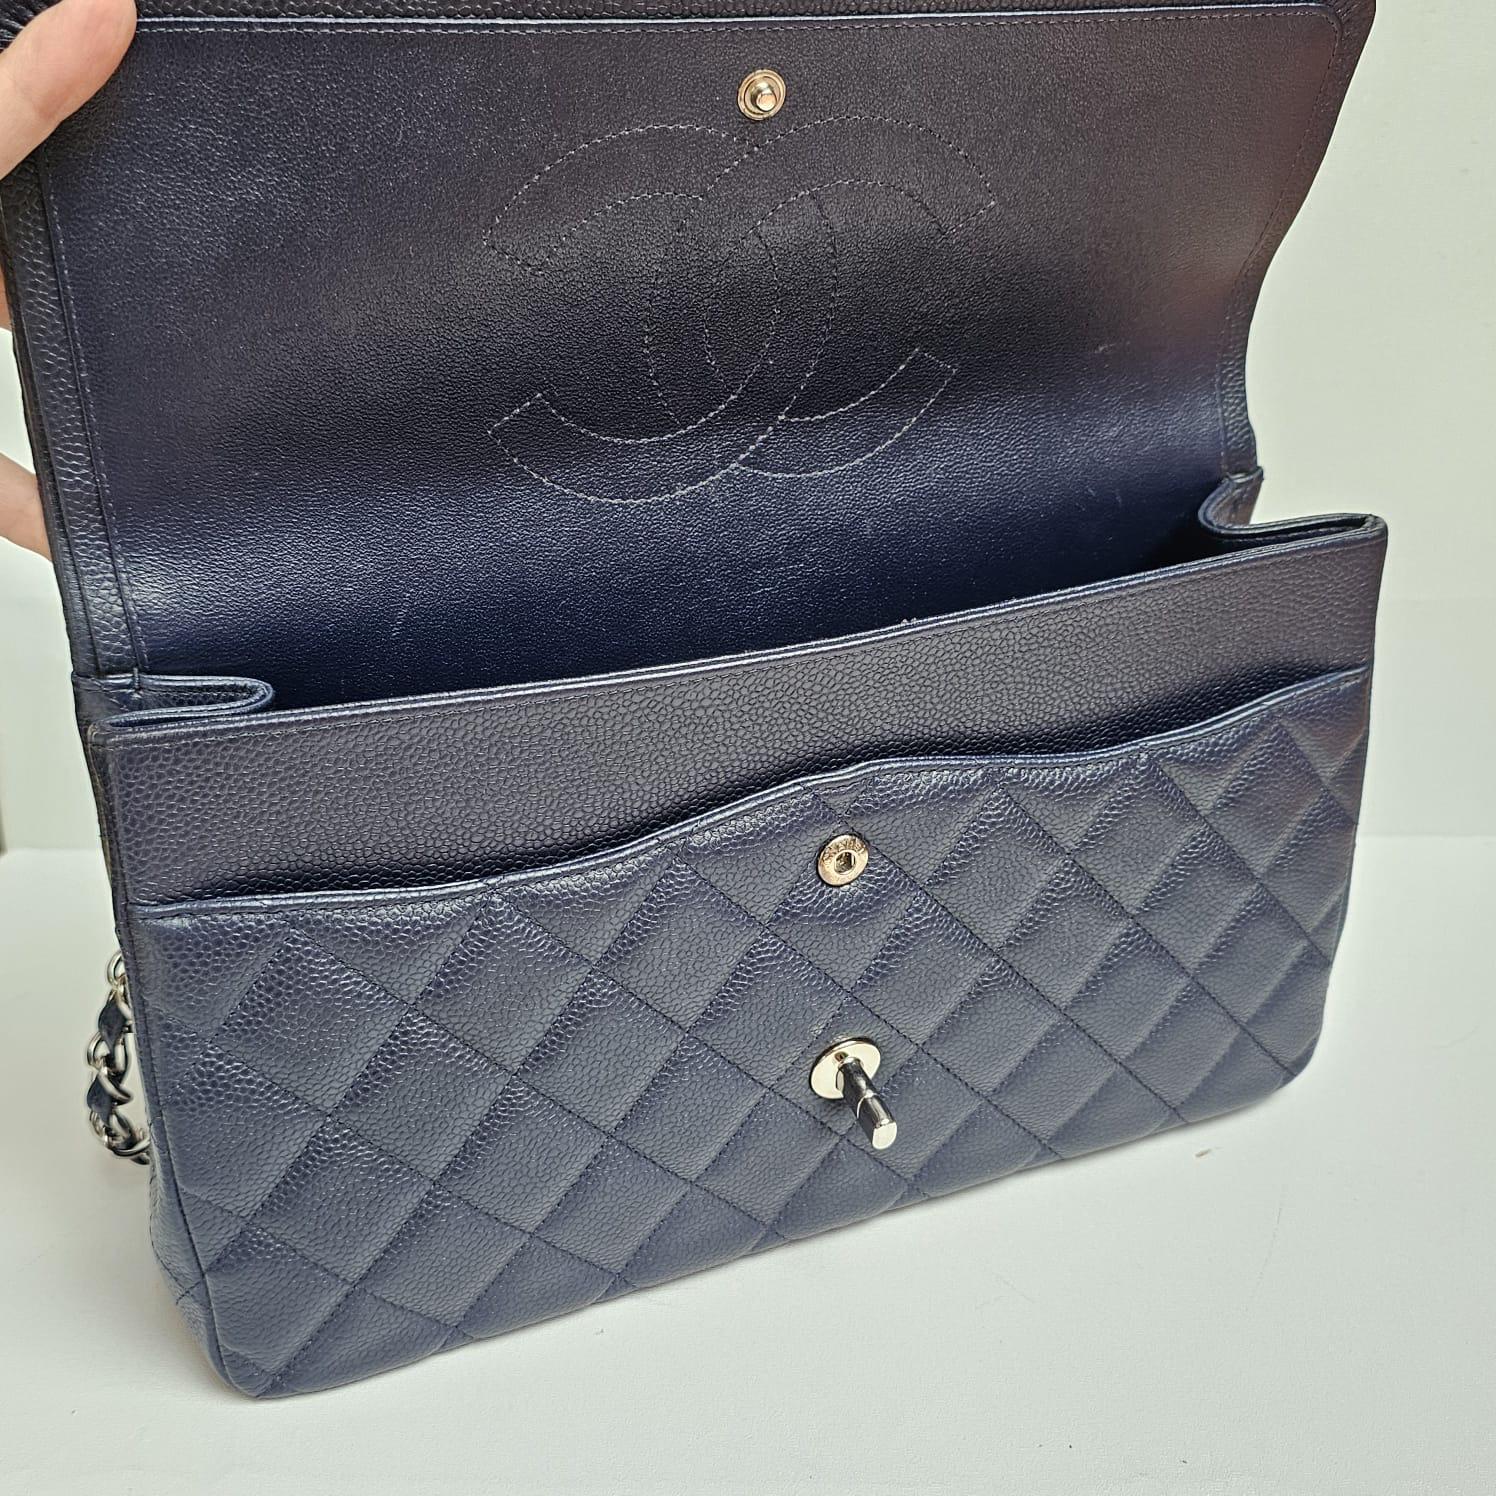 Classic jumbo flap bag in navy blue with silver hardware. Slight creasing on the leather flap with light scratches and rubbing on the corners. Lining shows light scratch marks. Series #18. Comes with the holo, card, dust bag, booklet and box.